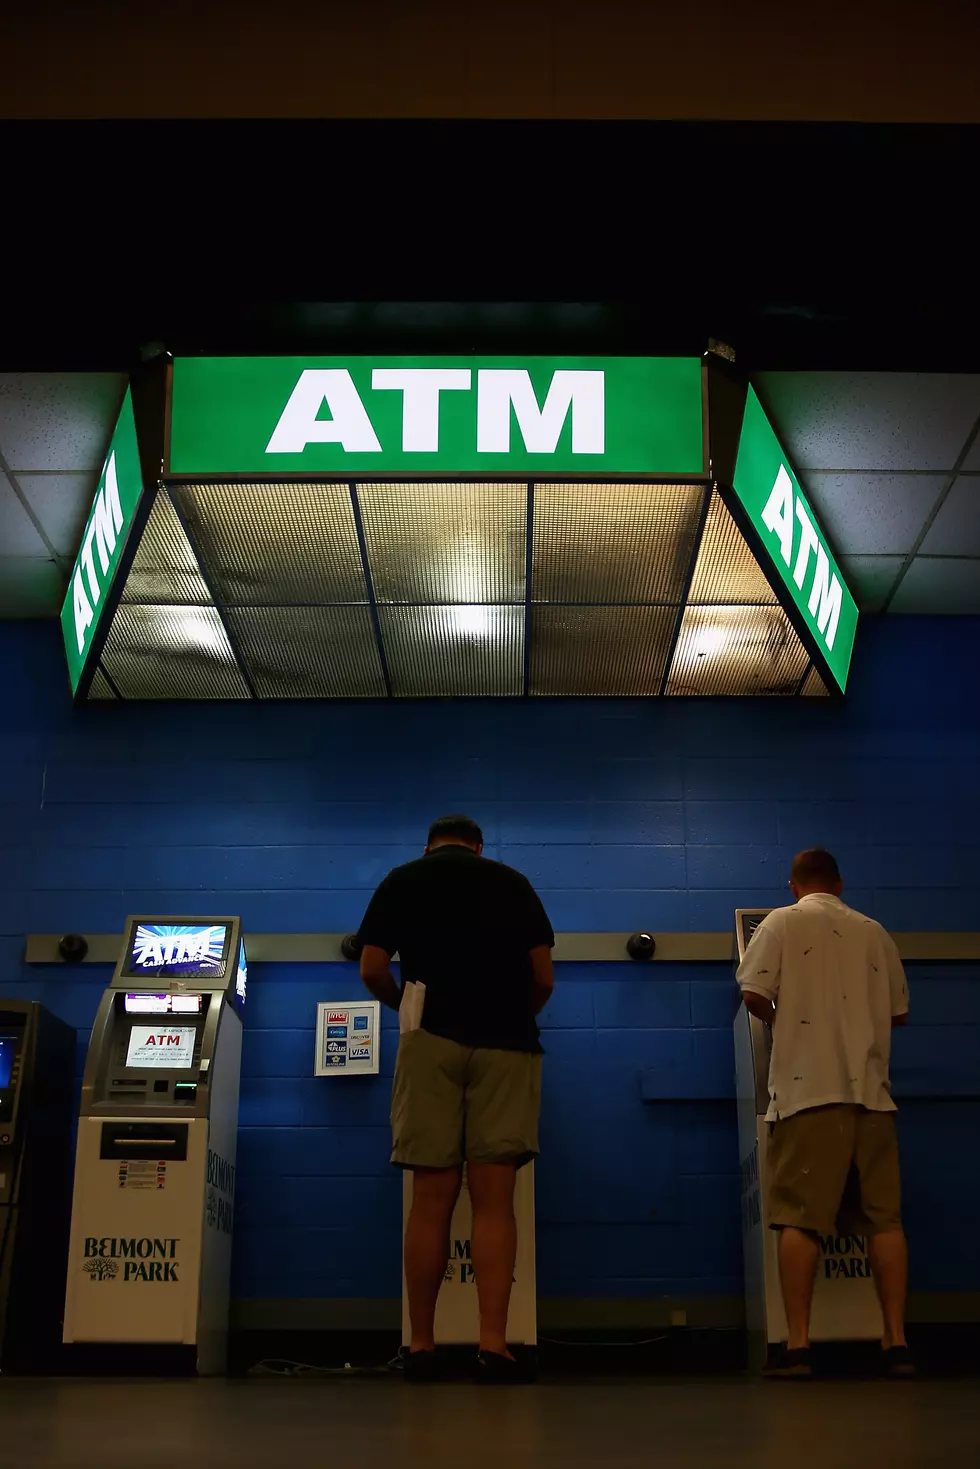 Watch A Moron Try To Blow Up An ATM (VIDEO)